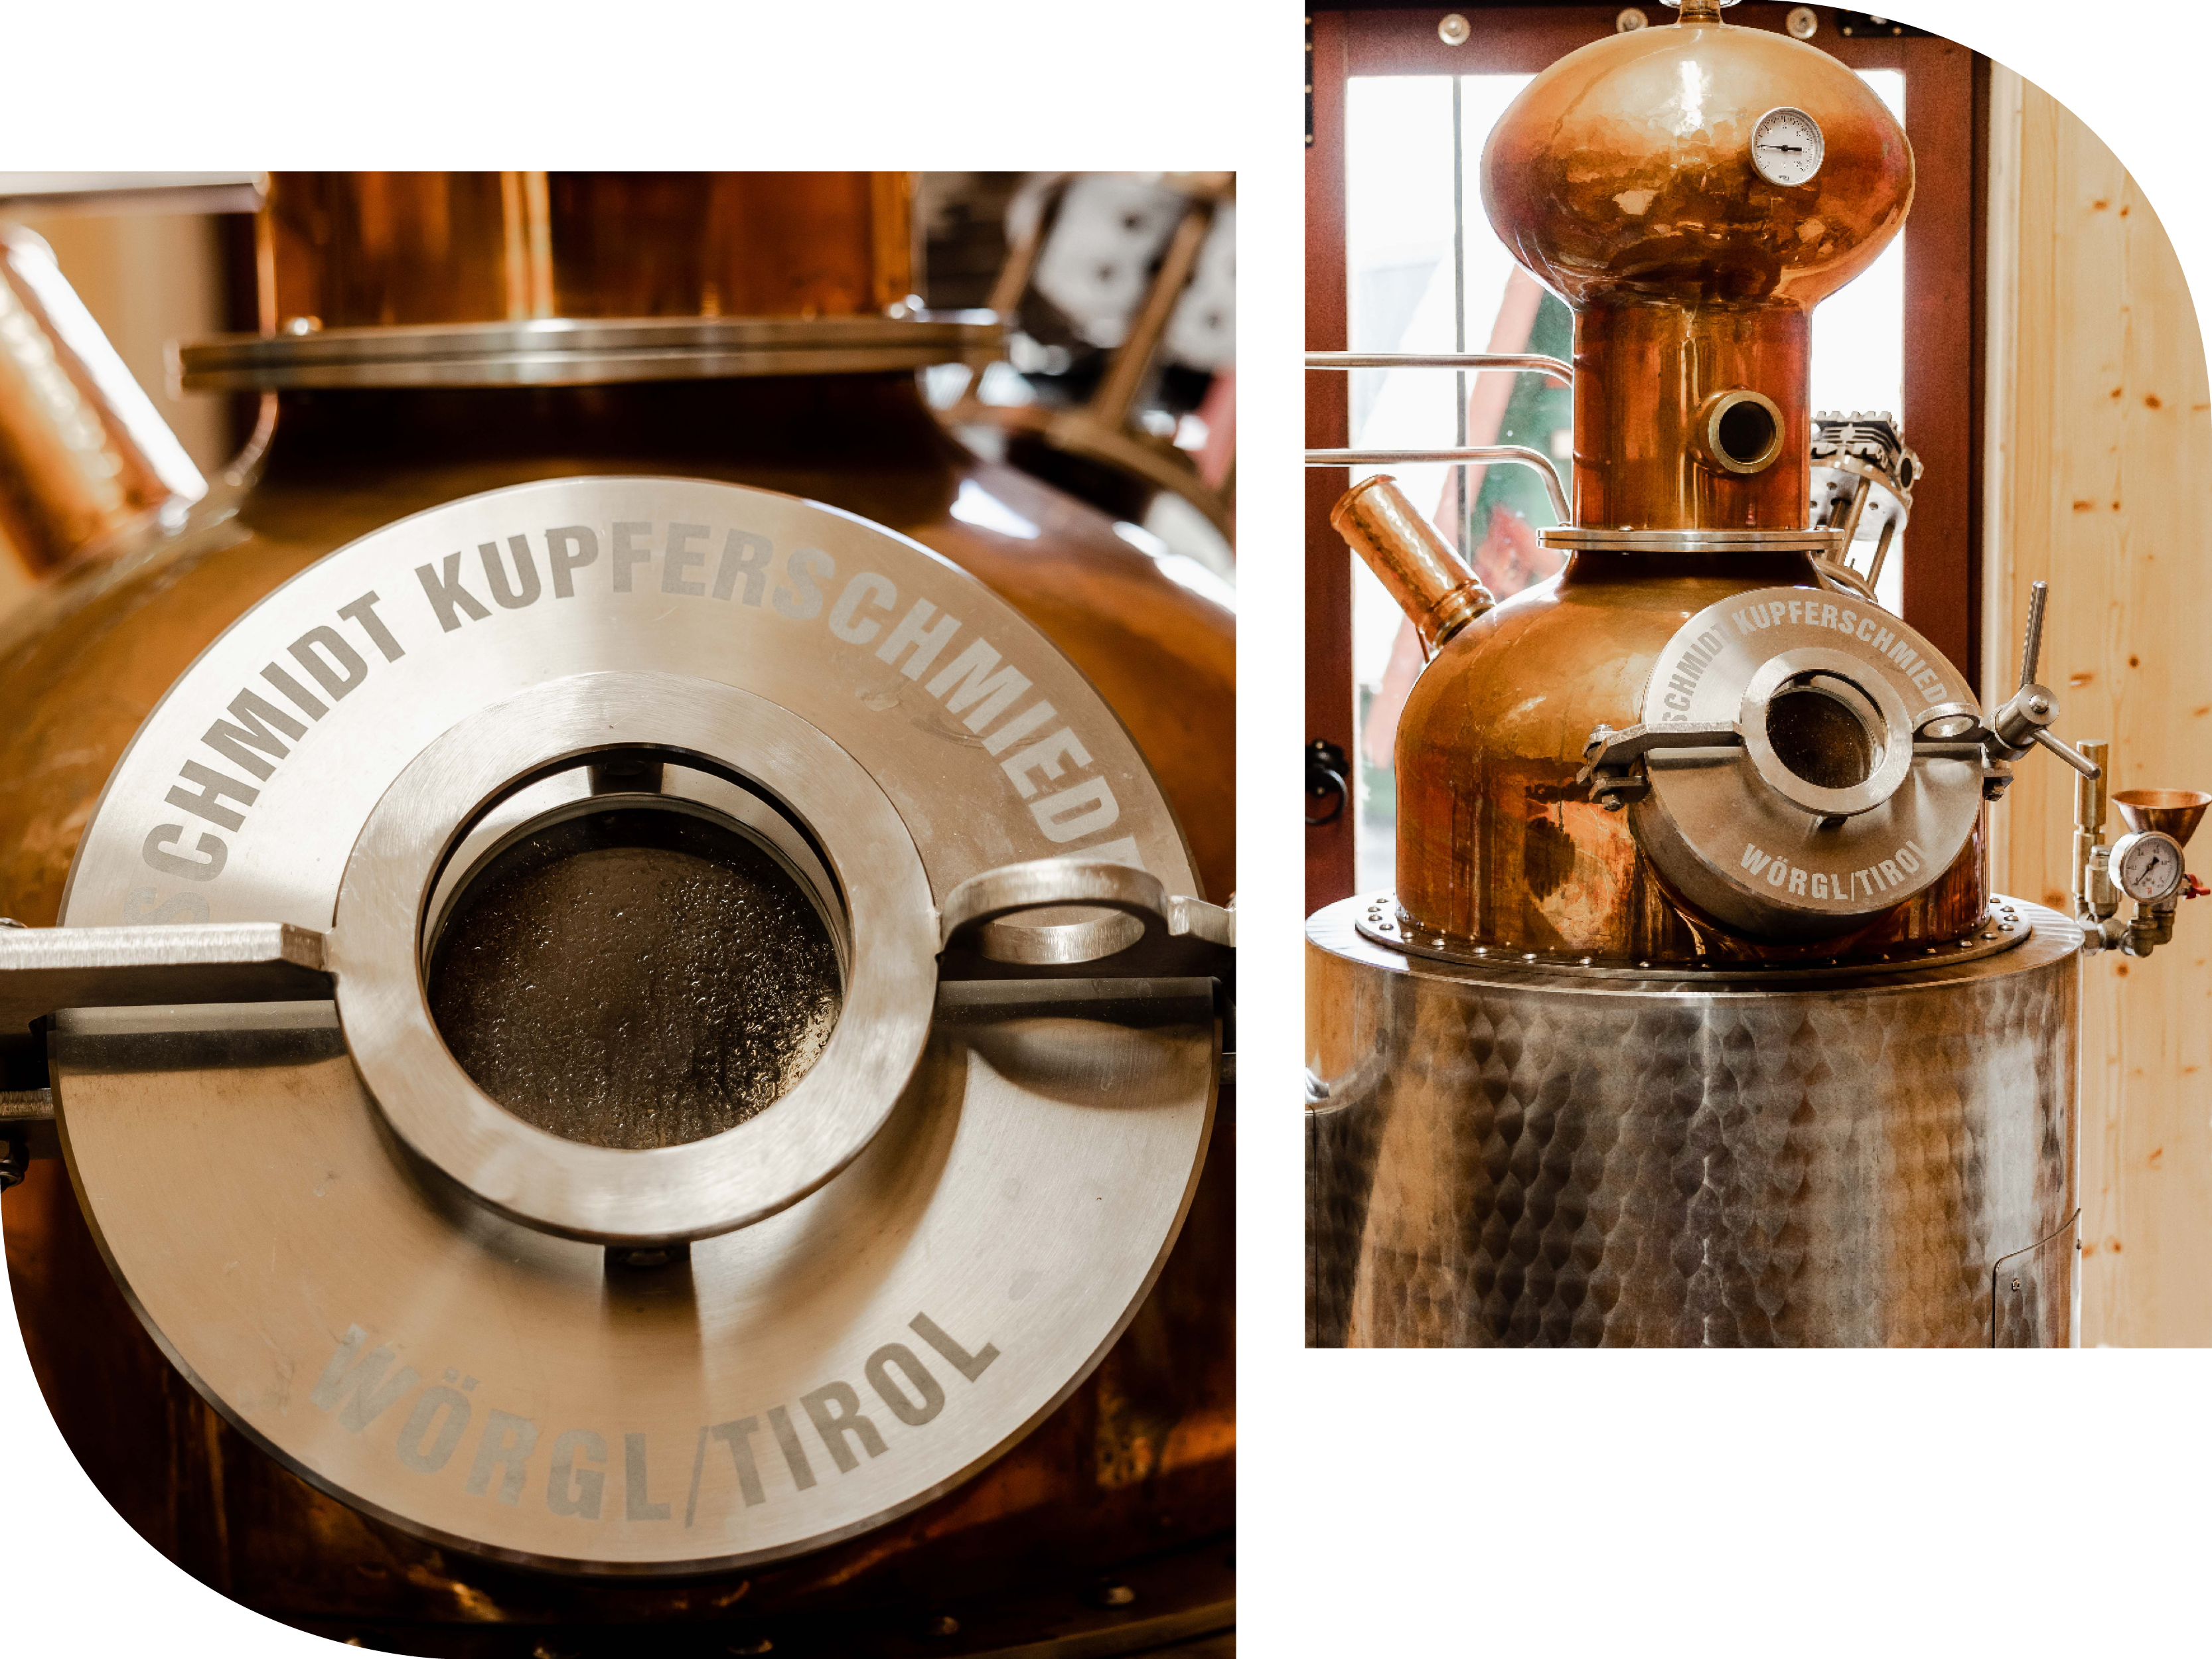 The specially commissioned still, named Tinkerbelle, was made by the renowned Wörgl coppersmith Herr Hans-Peter-Schmidt in the Austrian Tyrol and is housed in the unique, wooden crafted distillery building on a small island in a landscaped lochan.